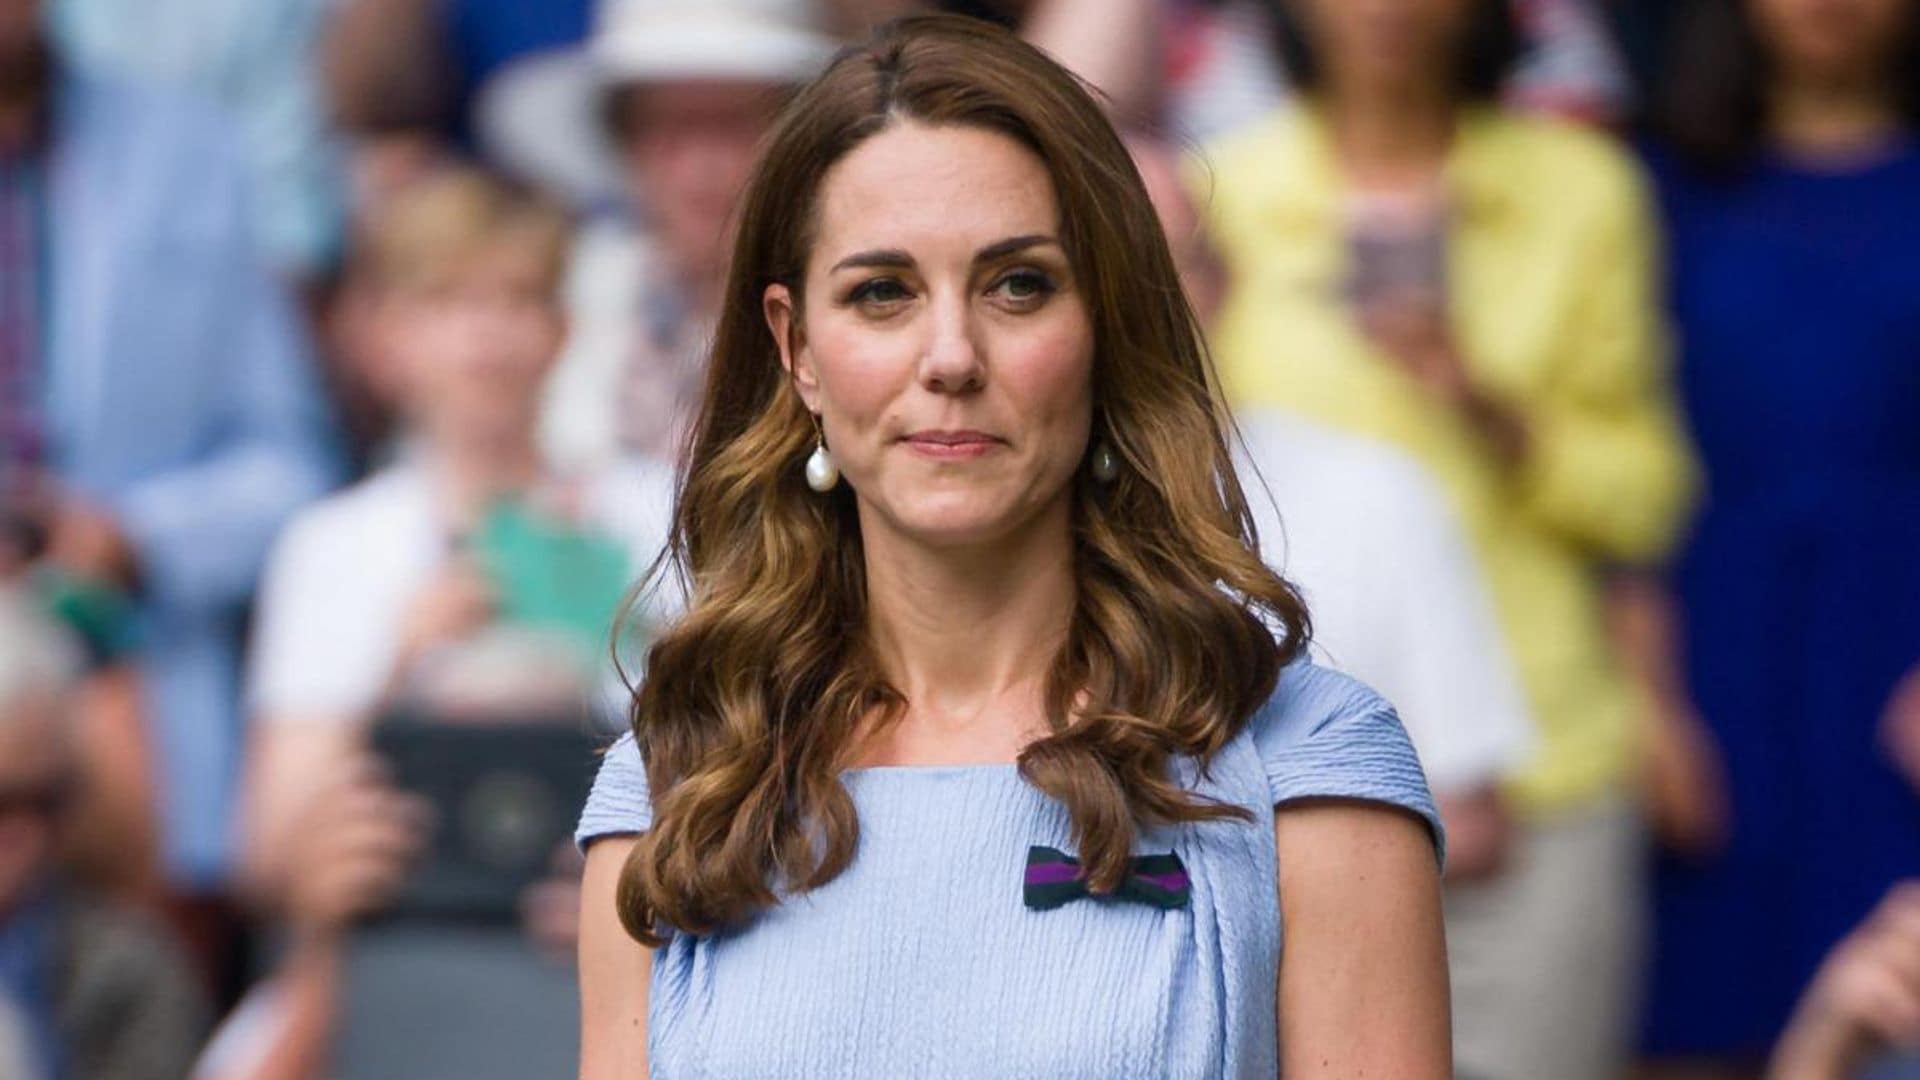 All we know about Kate Middleton’s ‘preventative chemotherapy’ treatment